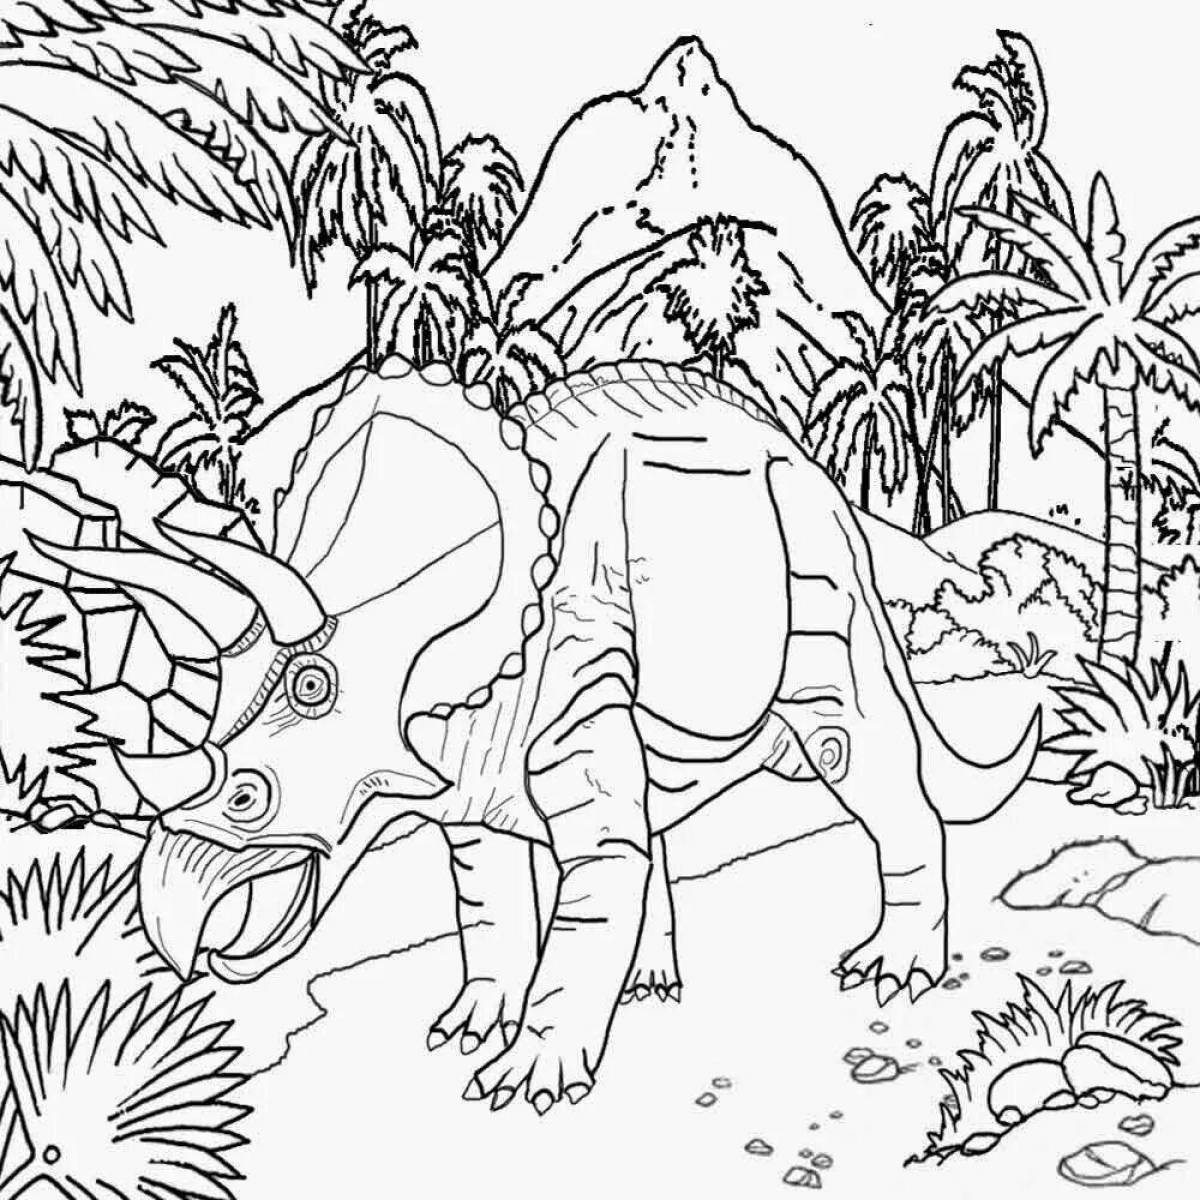 Glowing Jurassic World coloring page